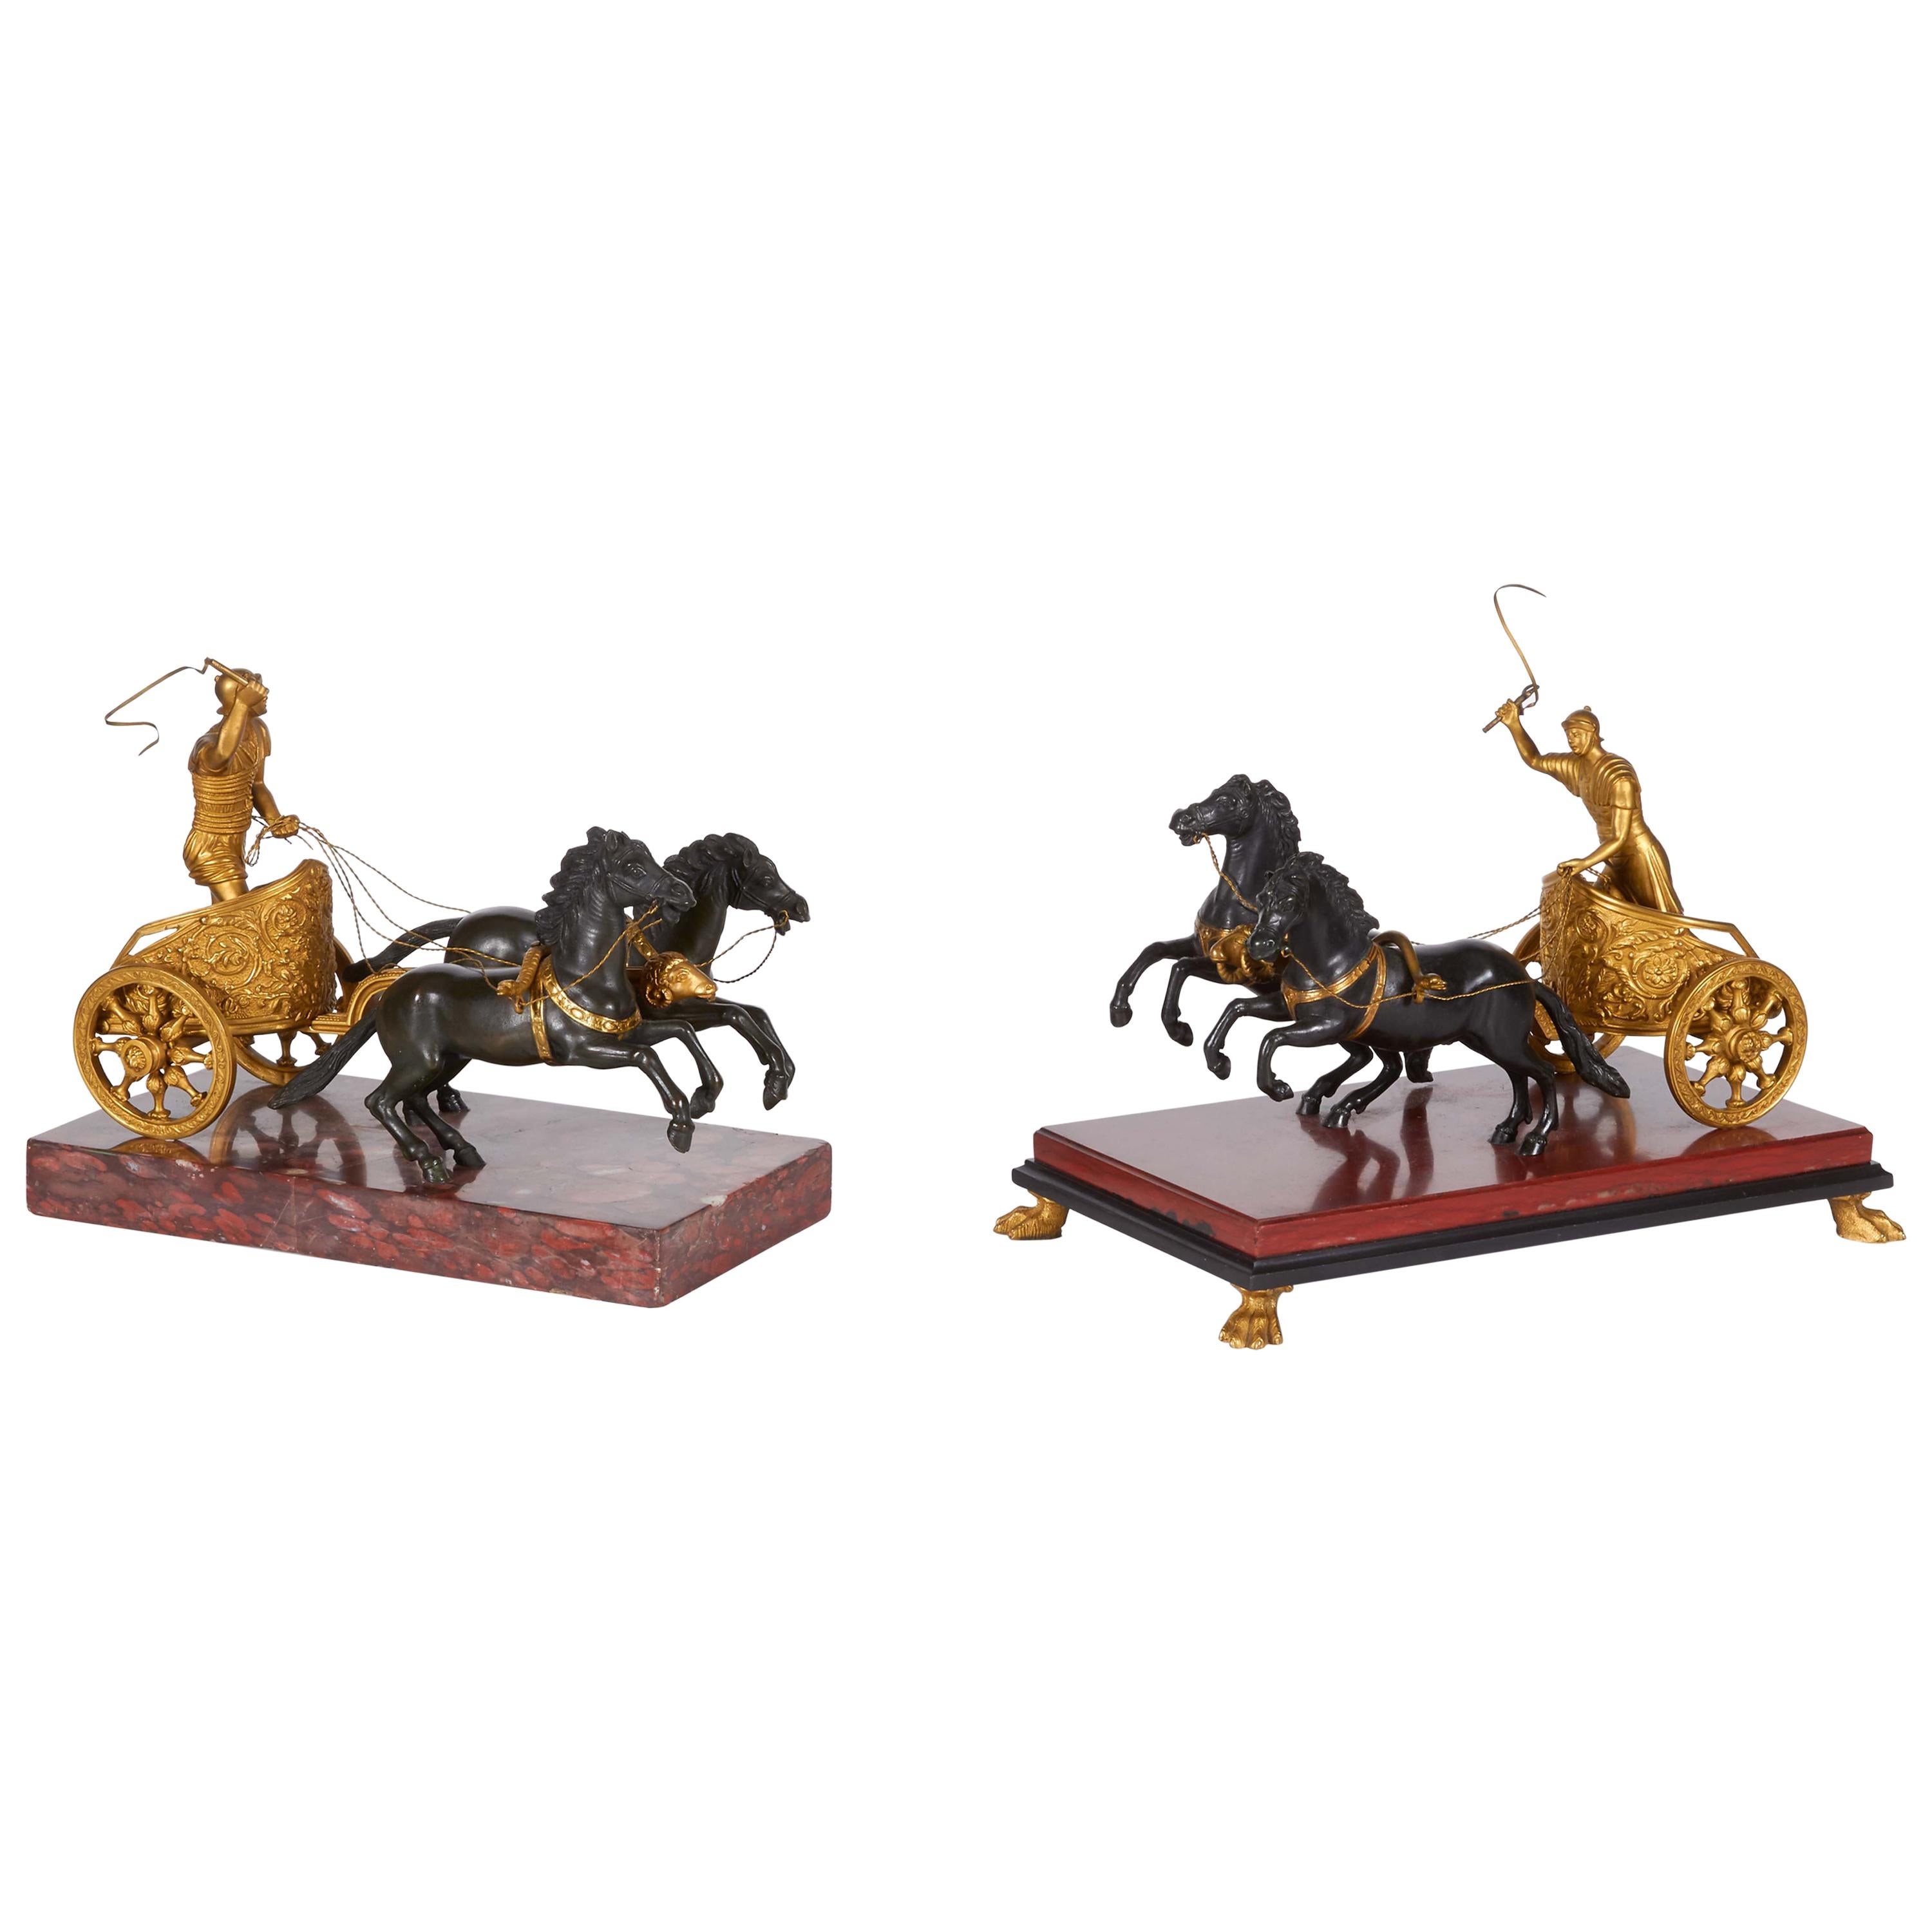 Pair of Neoclassical Grand Tour Roman Patinated and Ormolu Horse-Drawn Chariots